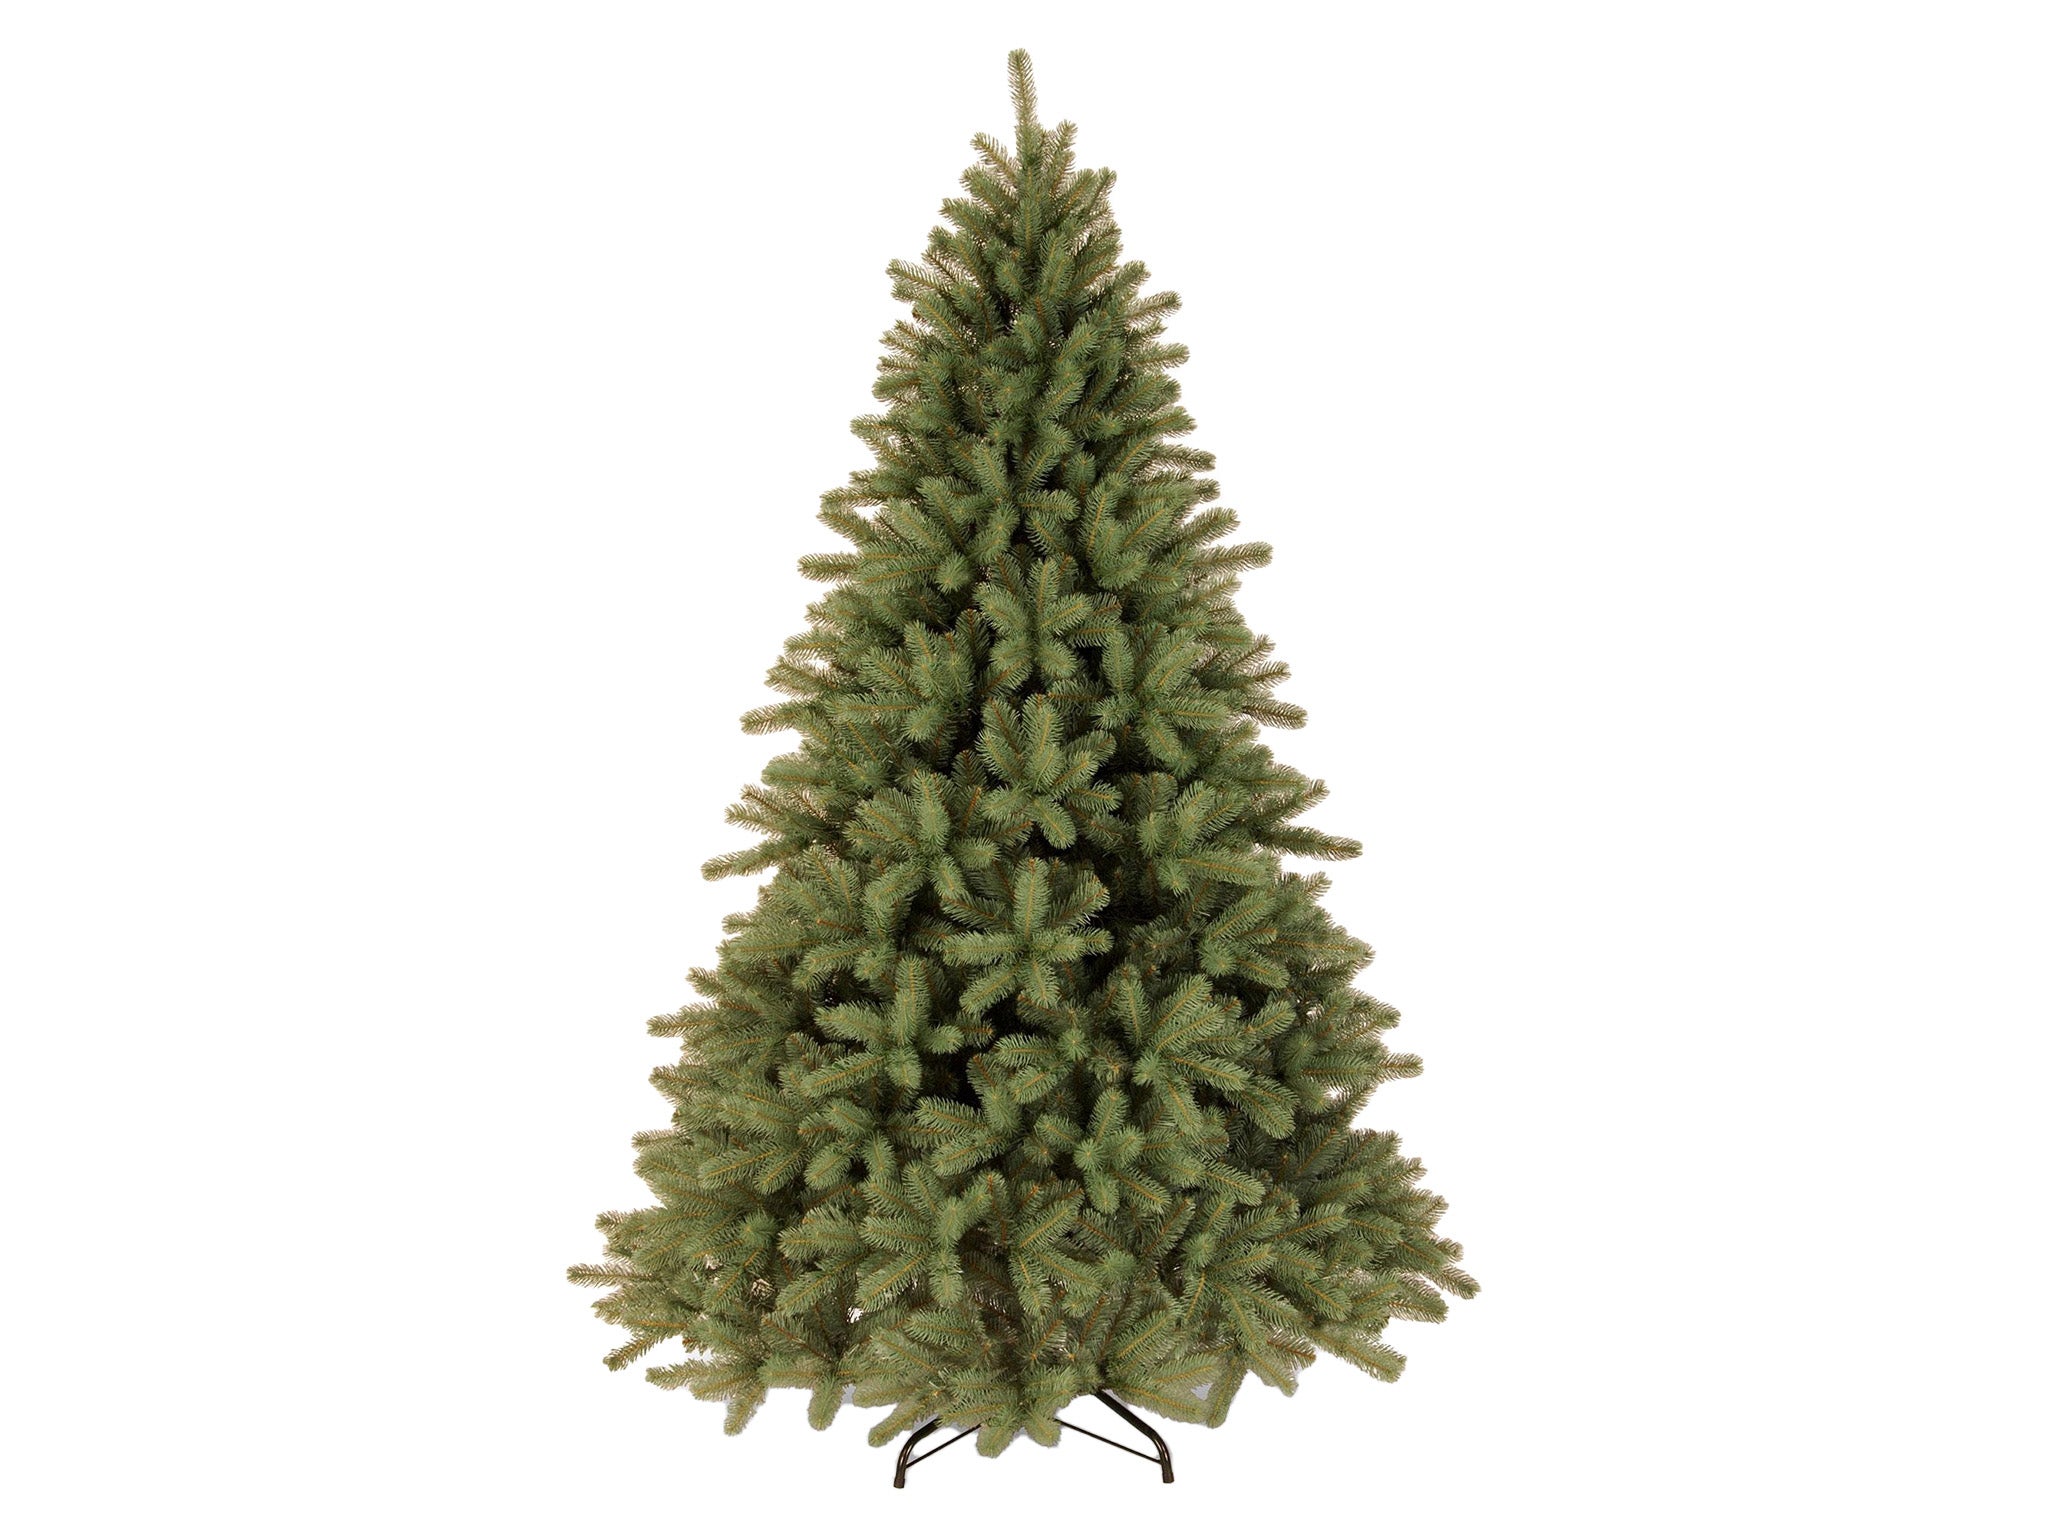 Hayes Garden World 6.5ft lakewood spruce feel-real artificial Christmas tree.jpg